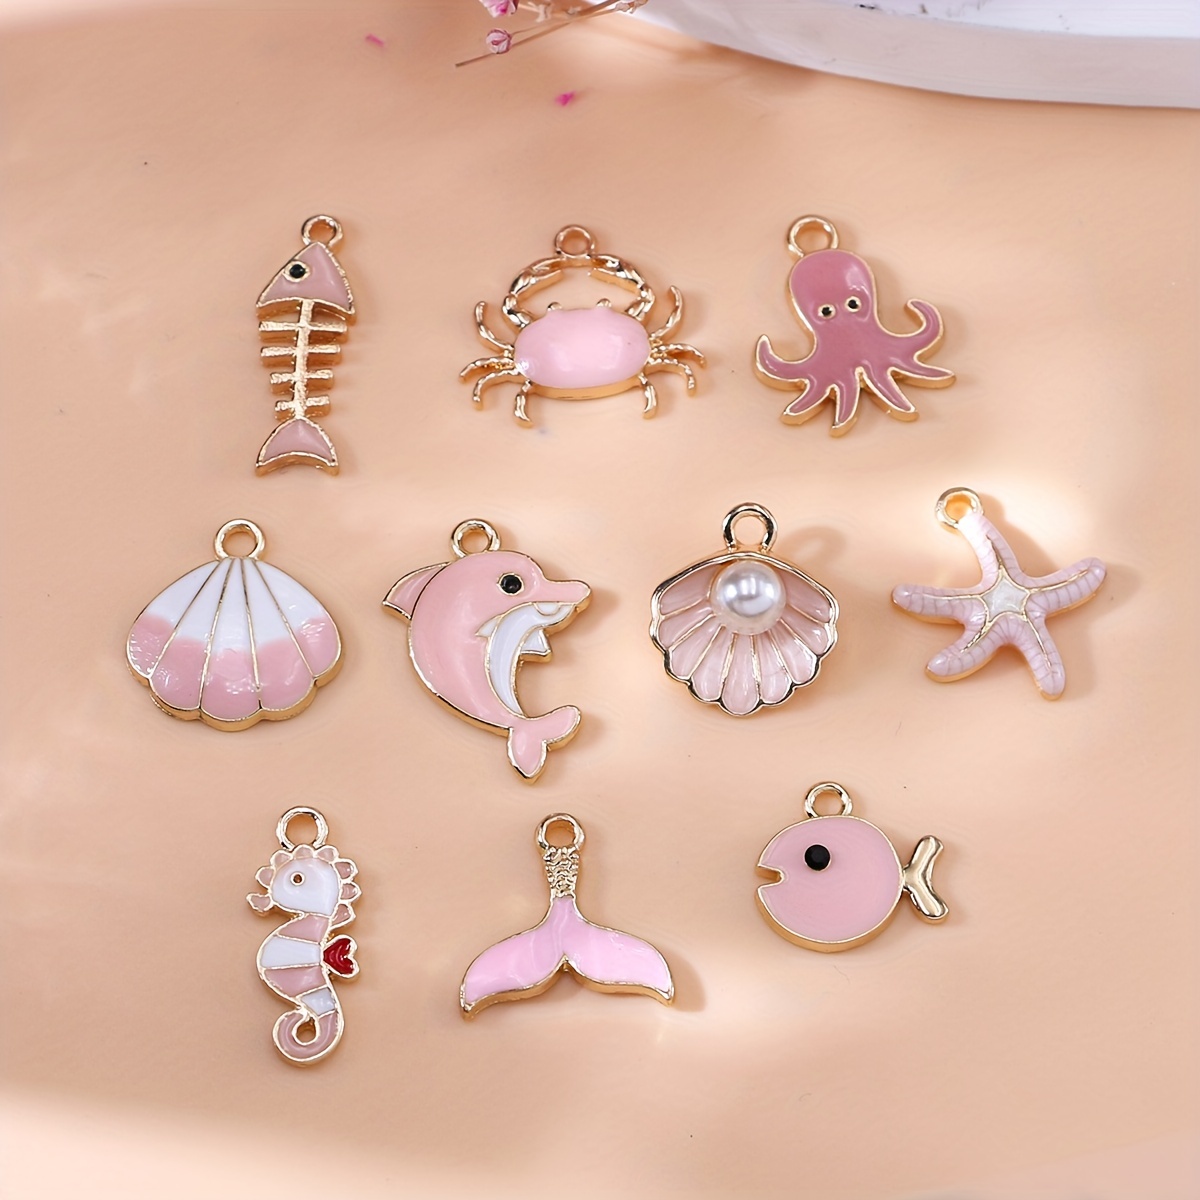 20Pcs Gold Plated Enamel Flower Charms Connector For Jewelry Making  Bracelet DIY Handmade Craft